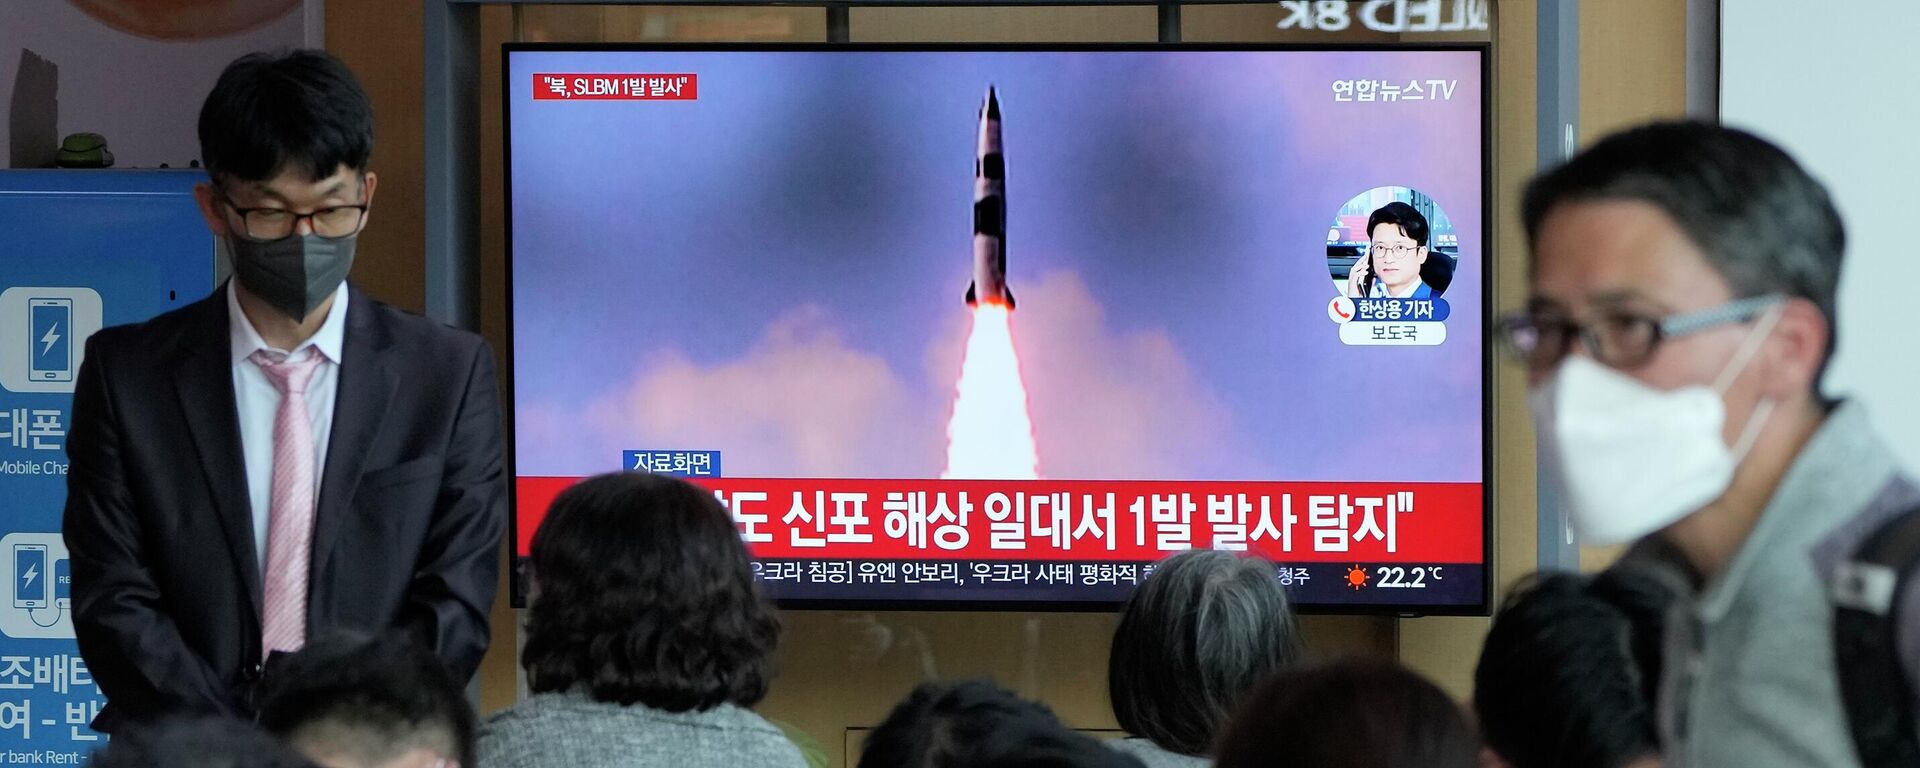 People watch a TV showing a file image of North Korea's missile launch during a news program at the Seoul Railway Station in Seoul, South Korea, Saturday, May 7, 2022. - Sputnik International, 1920, 19.10.2022